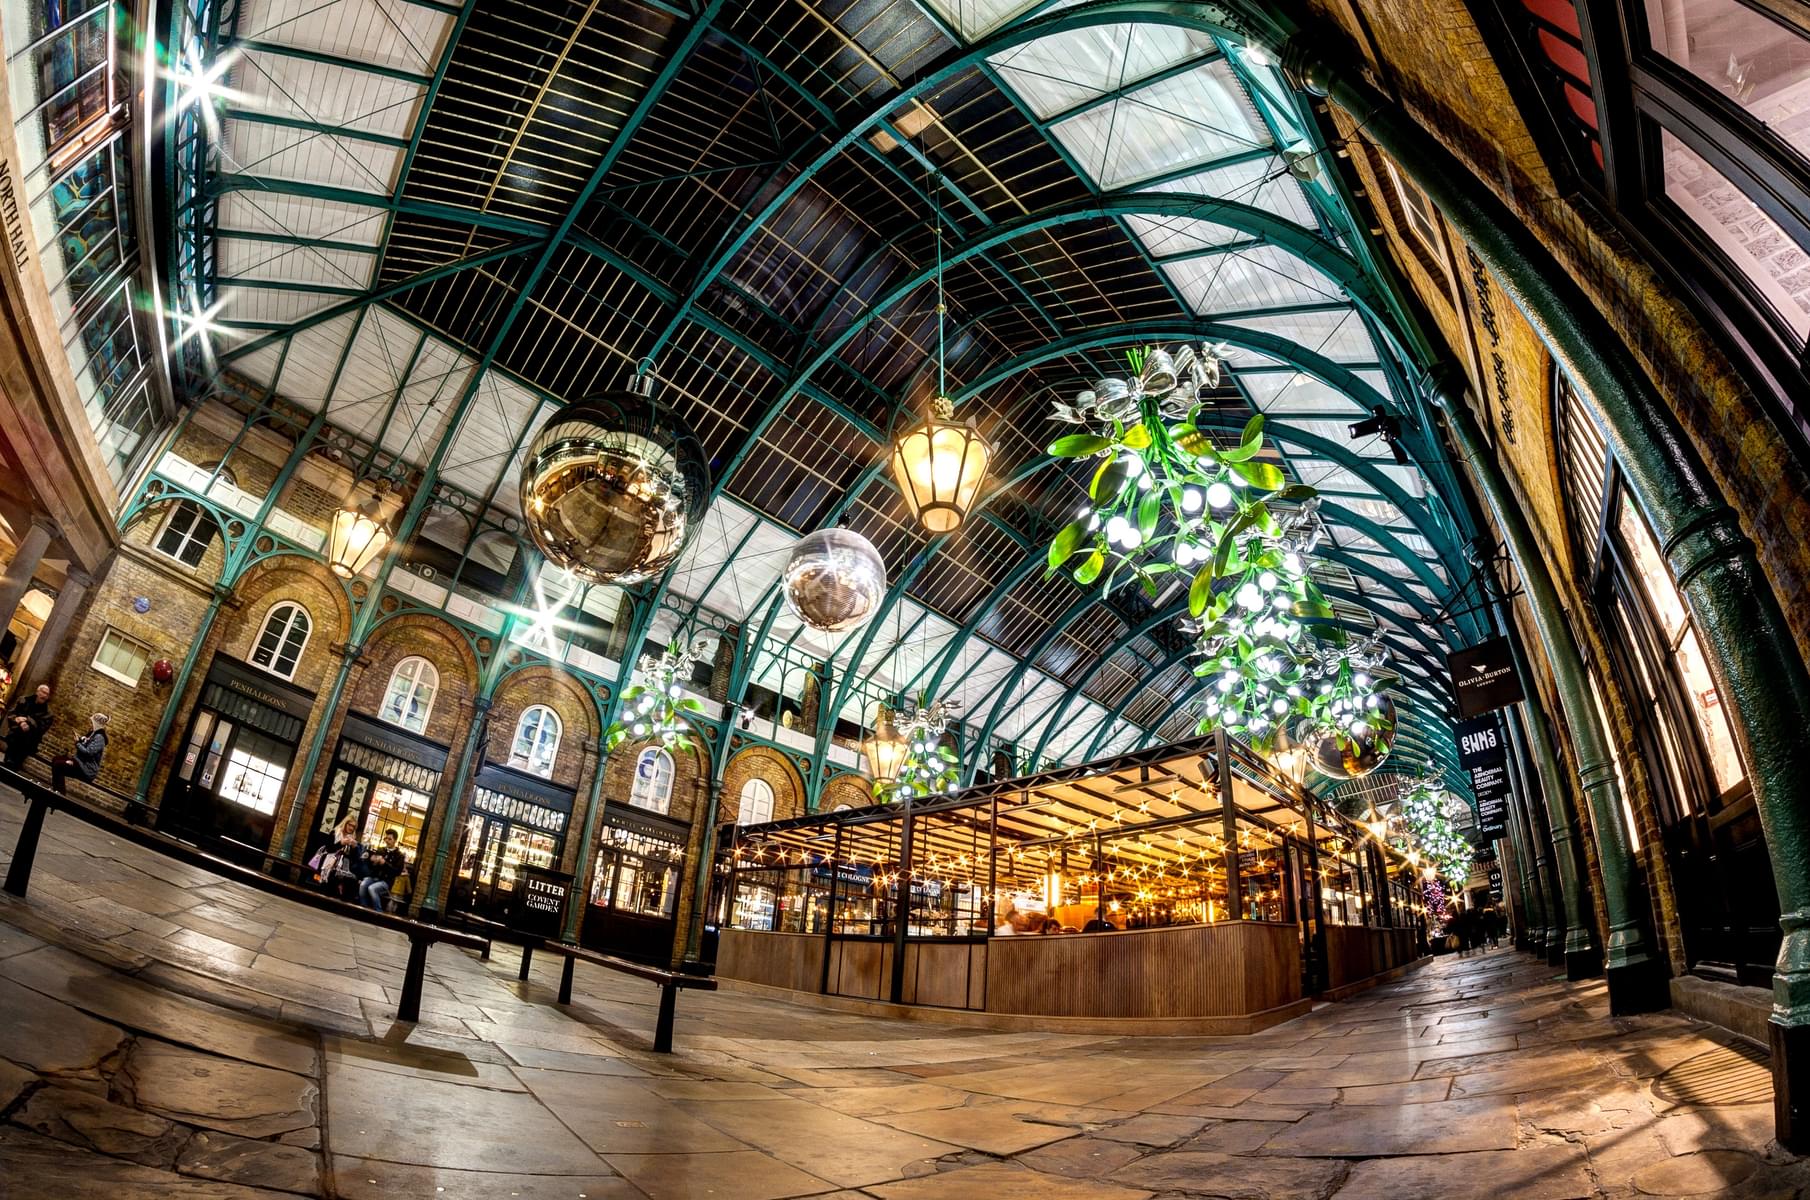 Why Visit Covent Garden?